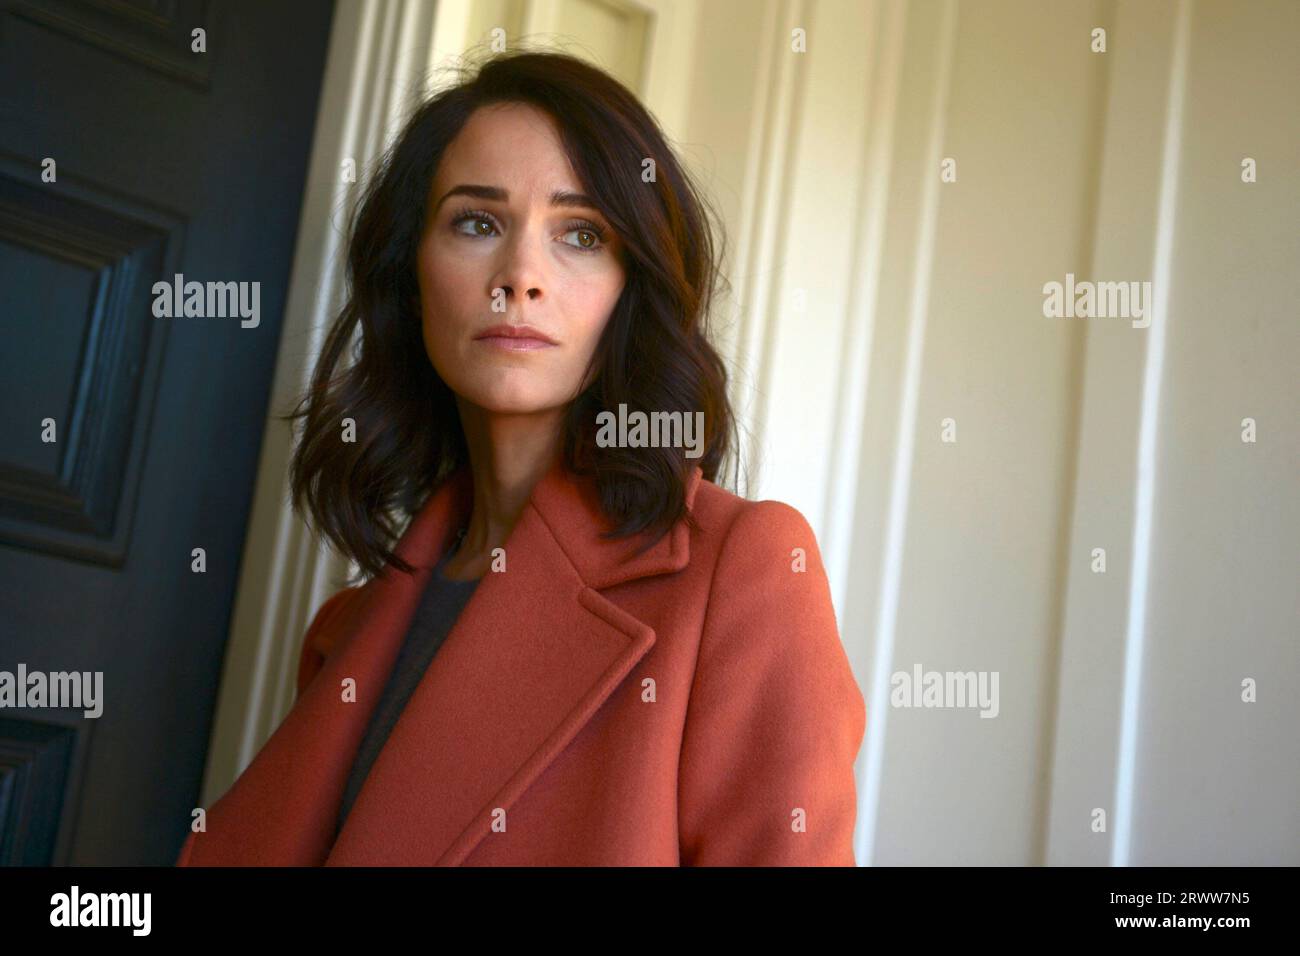 ABIGAIL SPENCER in TIMELESS (2016), directed by GREG BEEMAN. Credit: DAVIS ENTERTAINMENT / Album Stock Photo